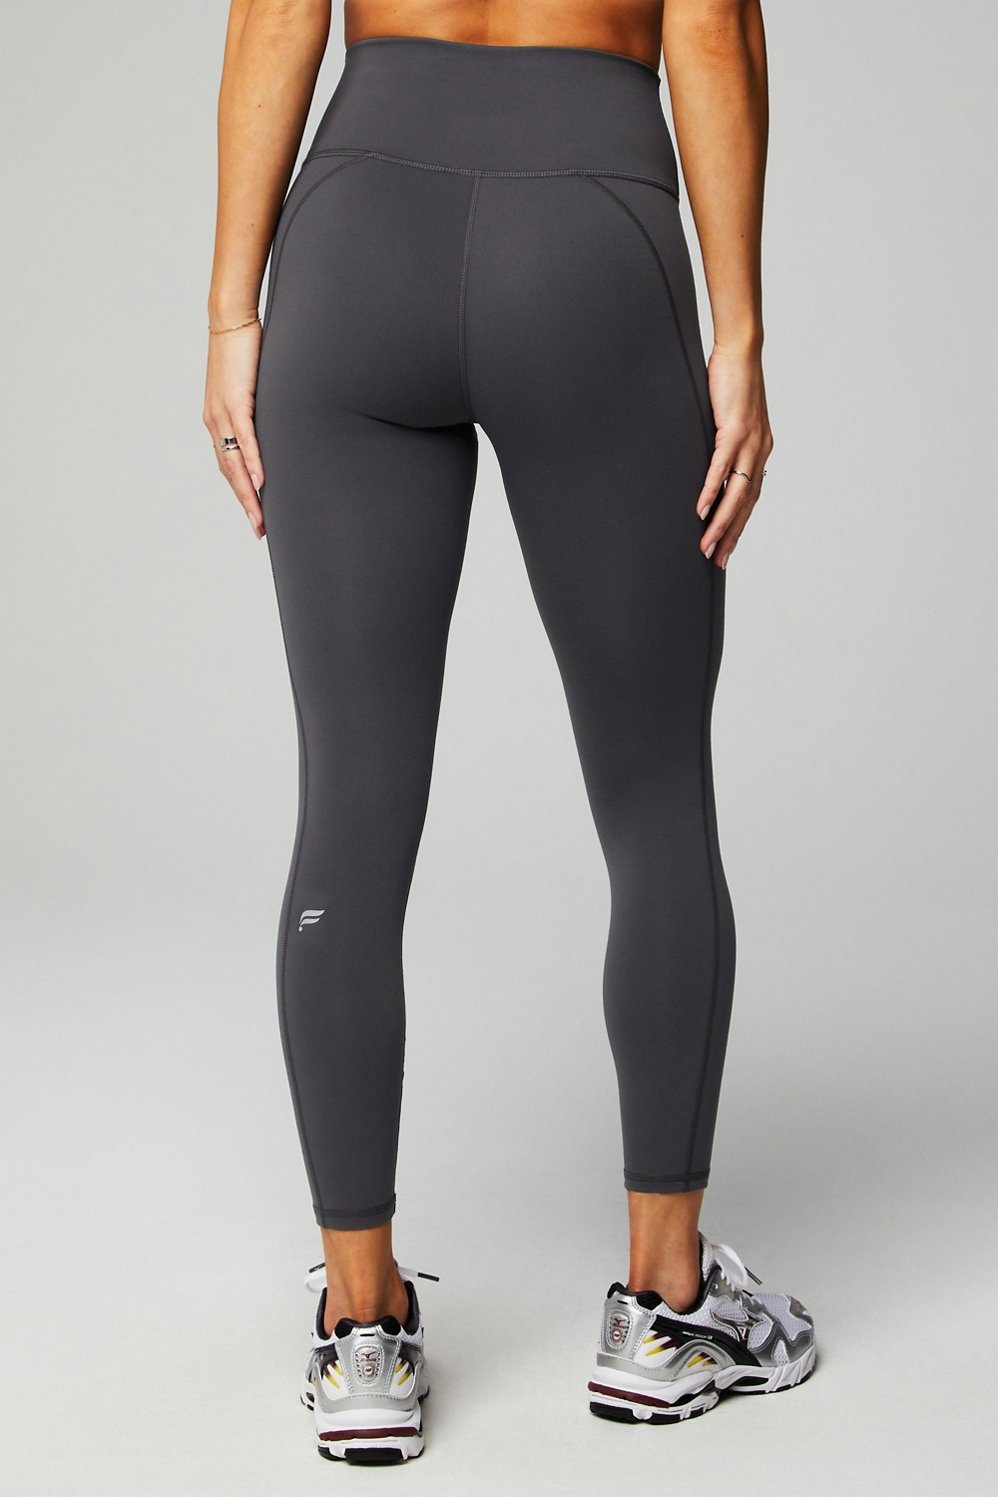 Fabletics Gray Active Pants Size S - 62% off